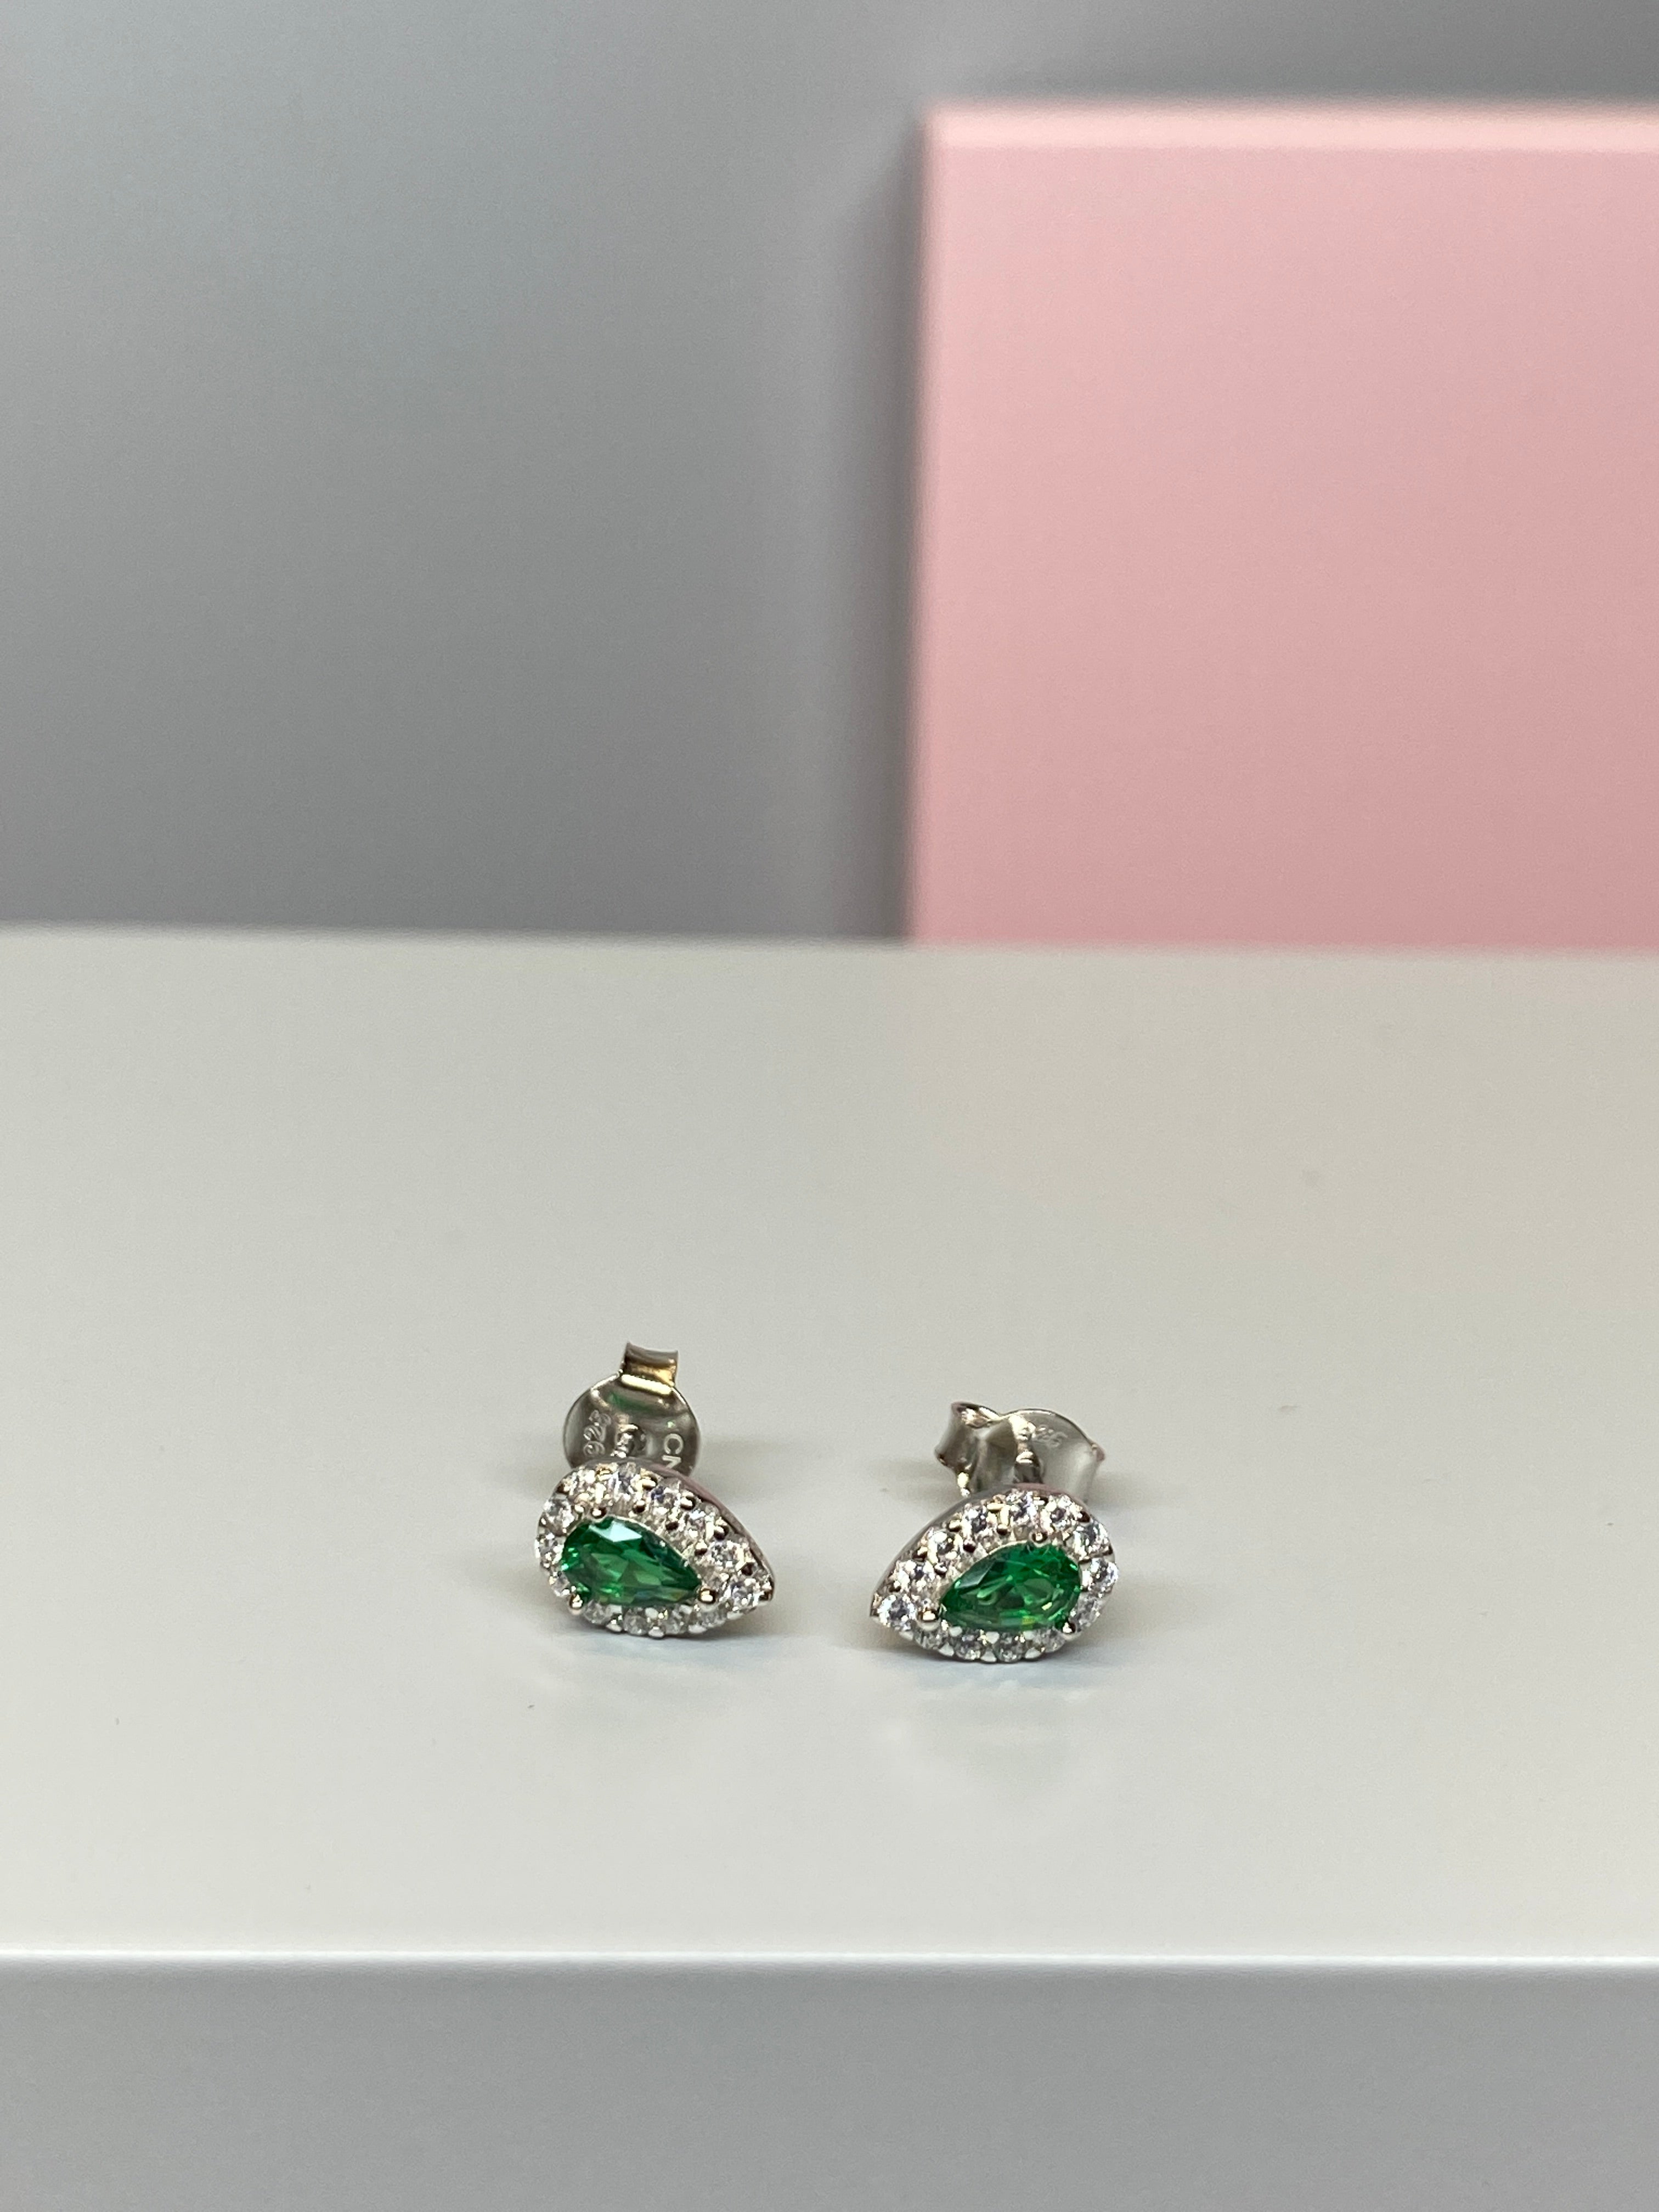 Sterling Silver Pear Shaped Green and CZ Earrings - Hallmark Jewellers Formby & The Jewellers Bench Widnes